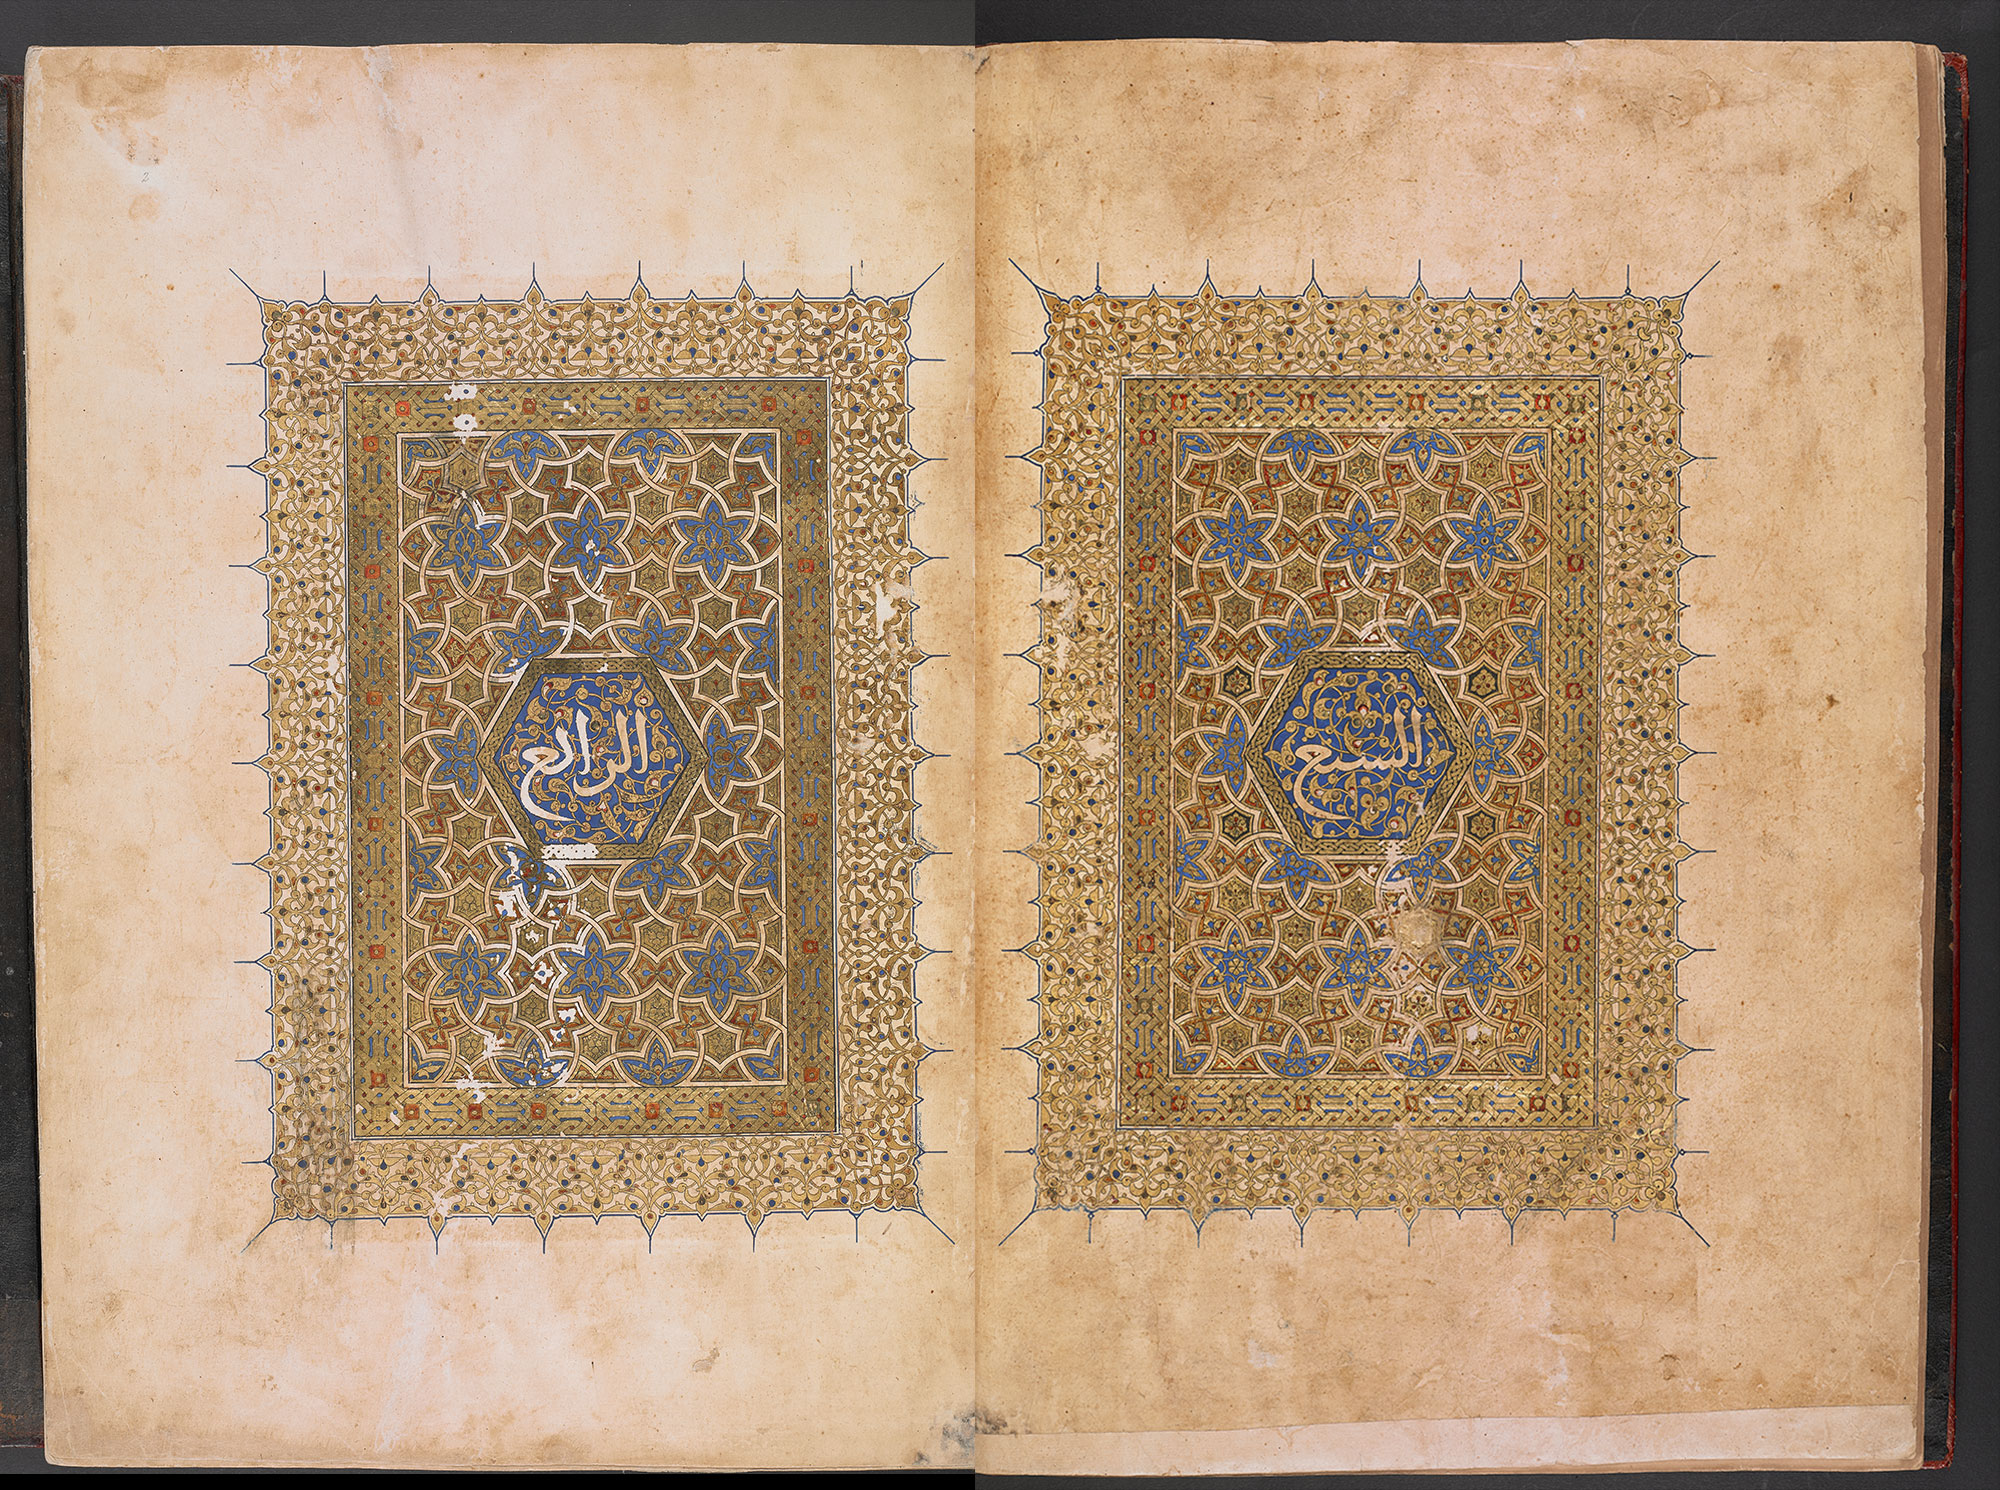 The Carpet Pages From Volume Four Of Sultan Baybars Seven Volume Qur